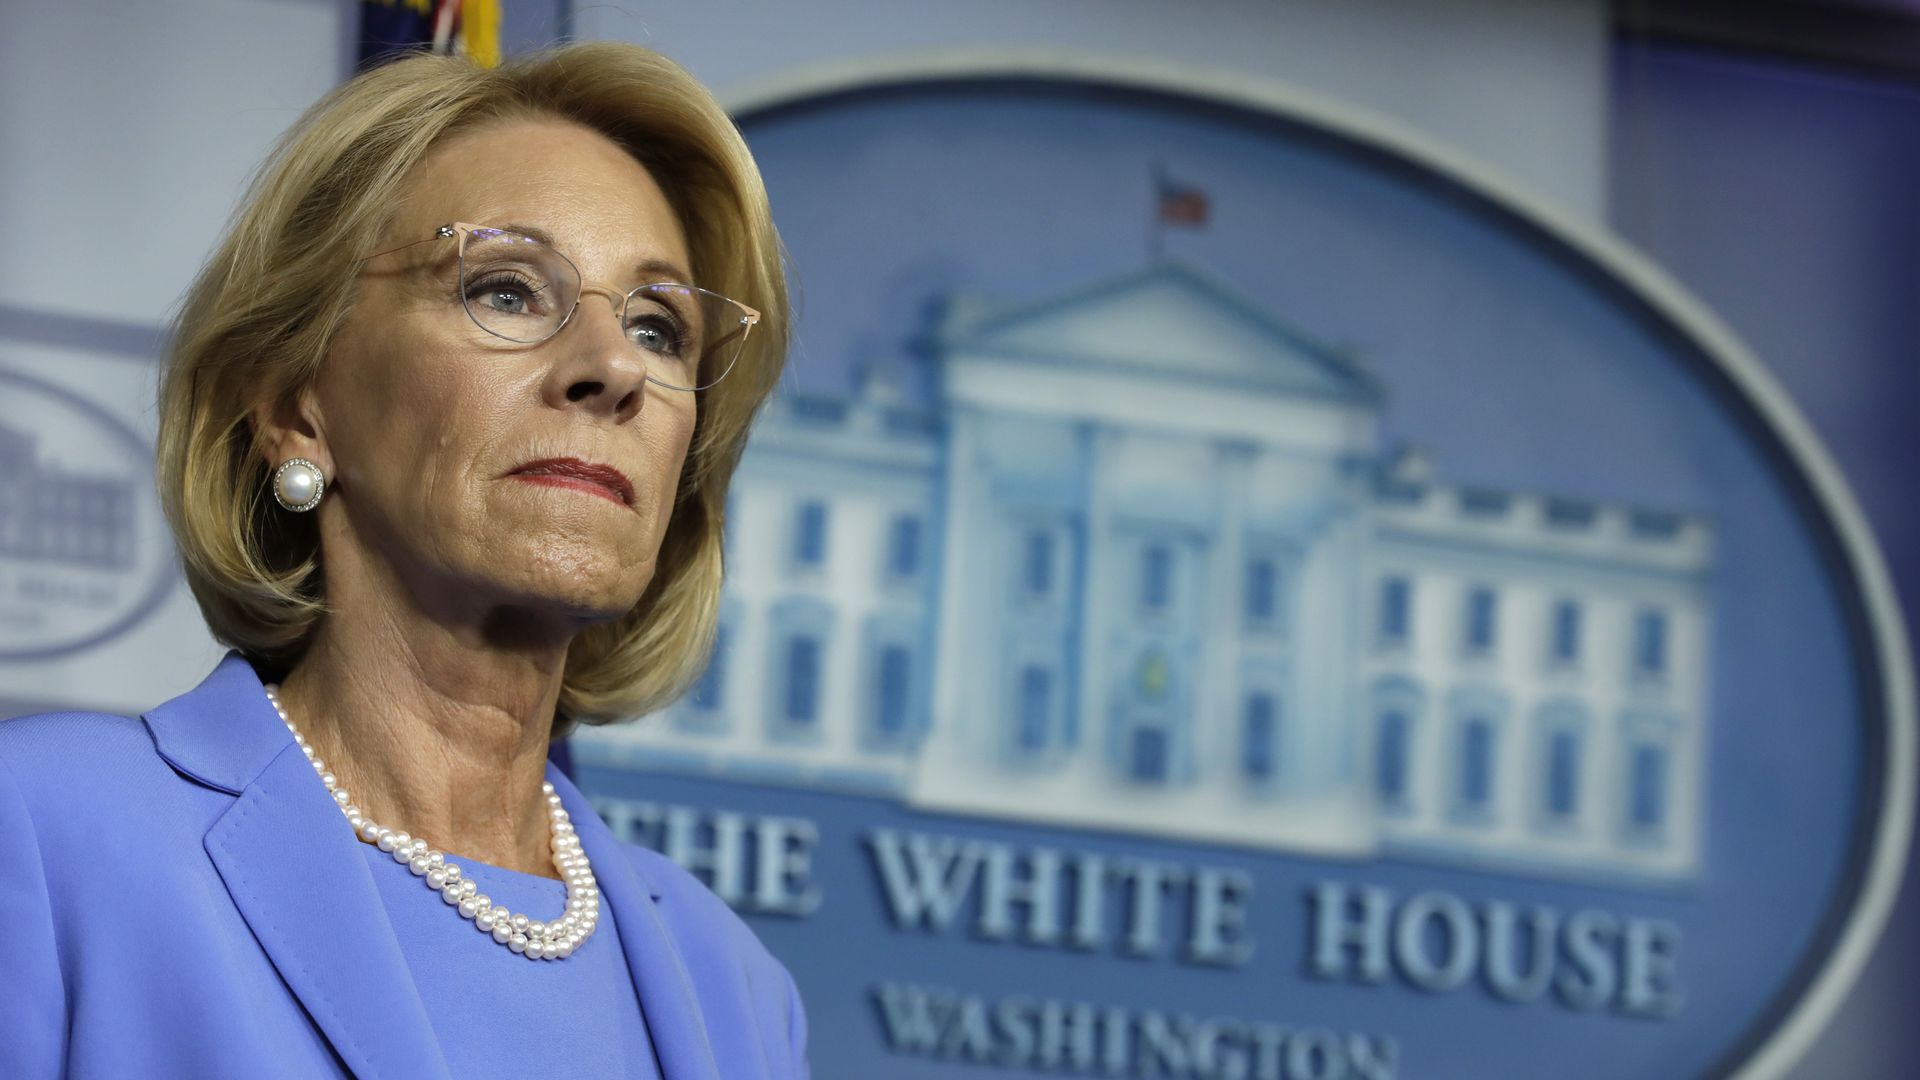 Betsy DeVos, U.S. secretary of education, listens during a Coronavirus Task Force news conference at the White House in Washington, D.C., U.S., on Friday, March 27, 2020. 